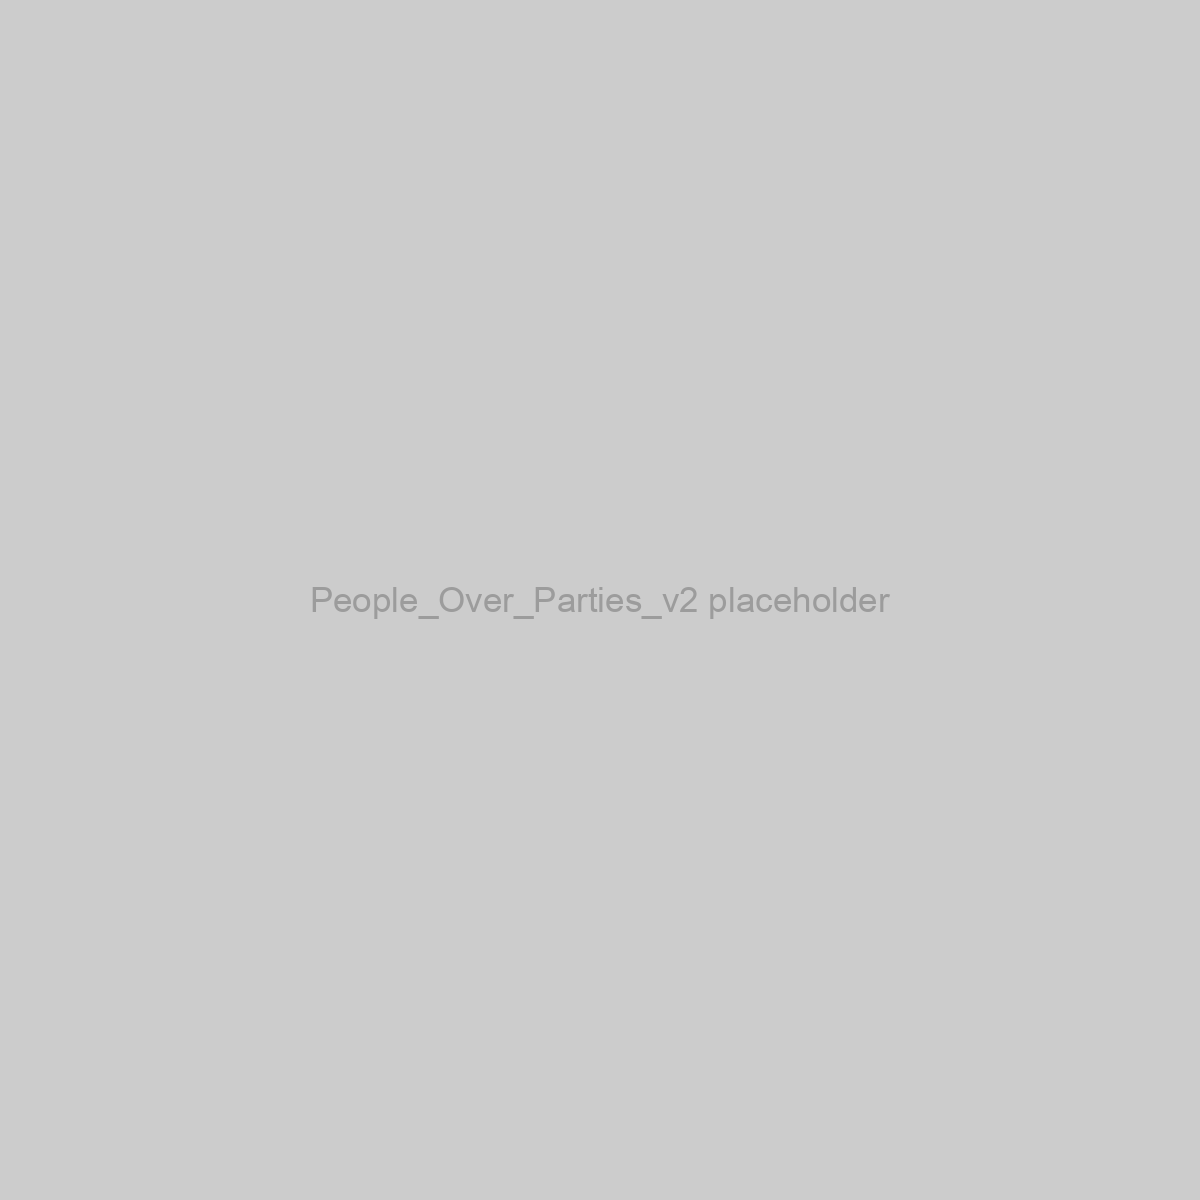 People_Over_Parties_v2 Placeholder Image